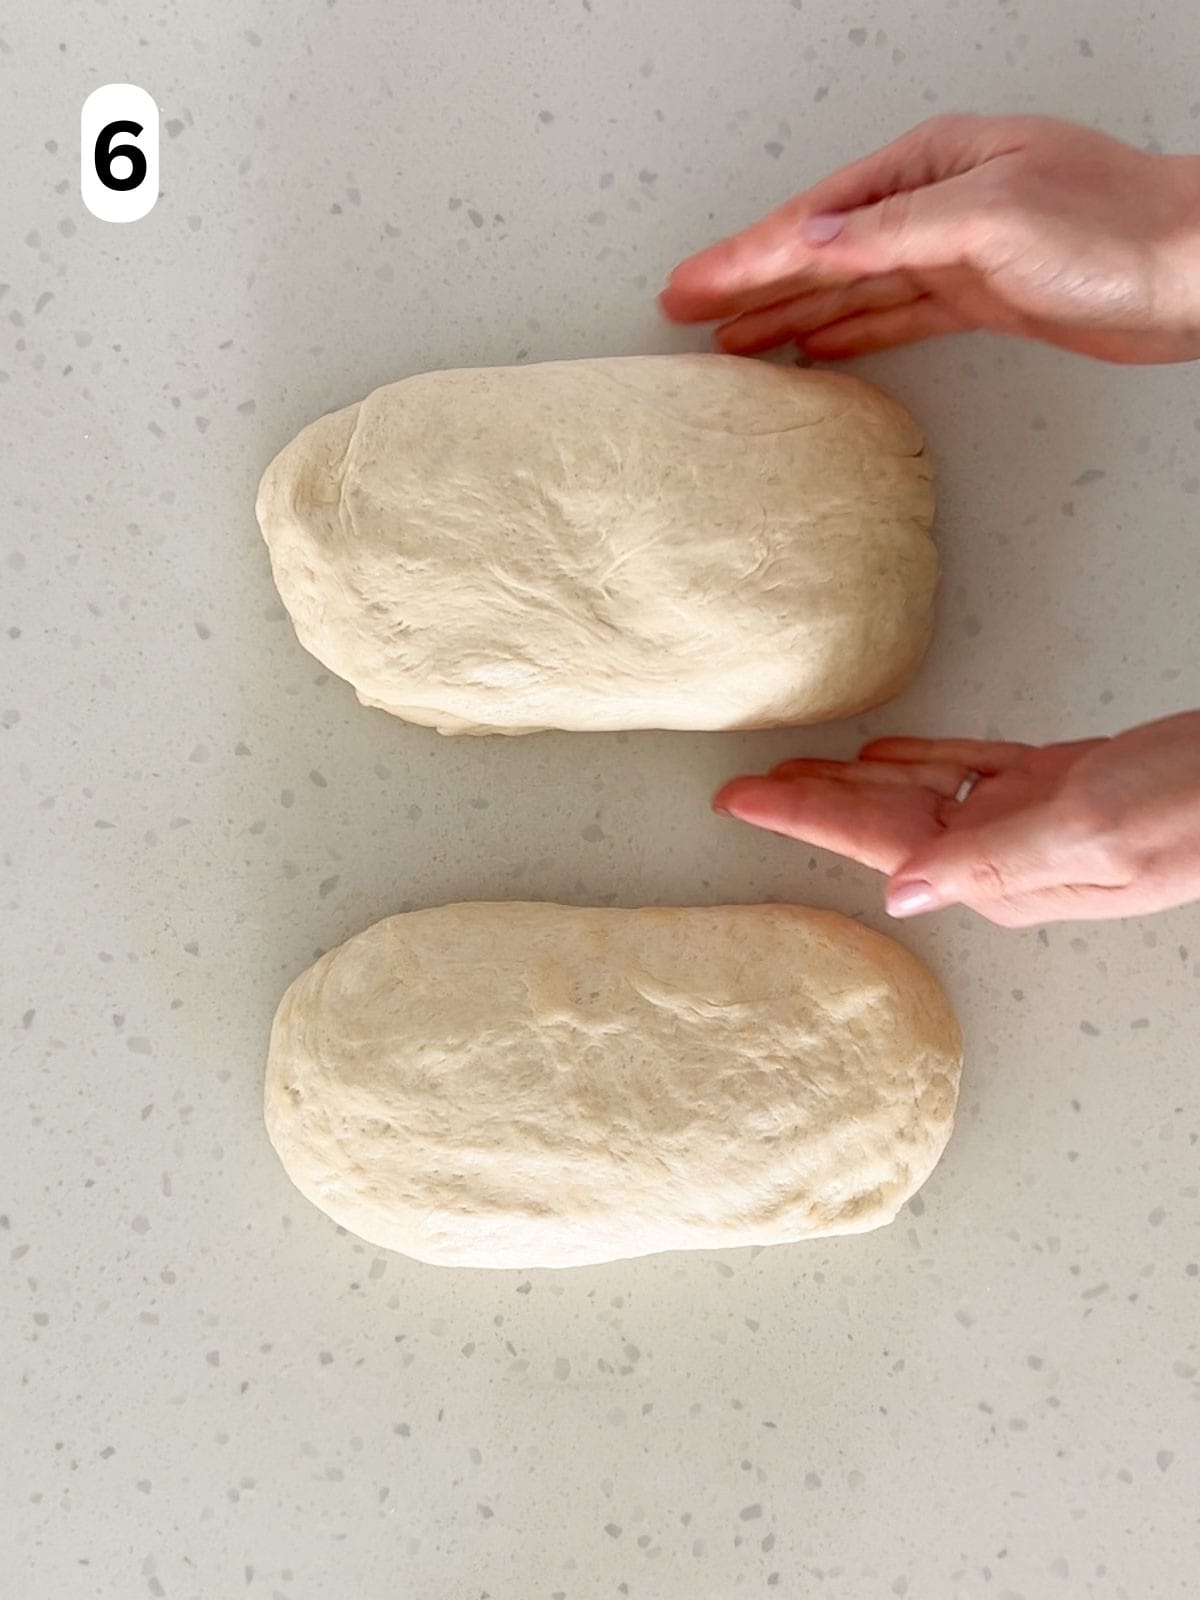 The dough is shaped into two, equal sized loaves.